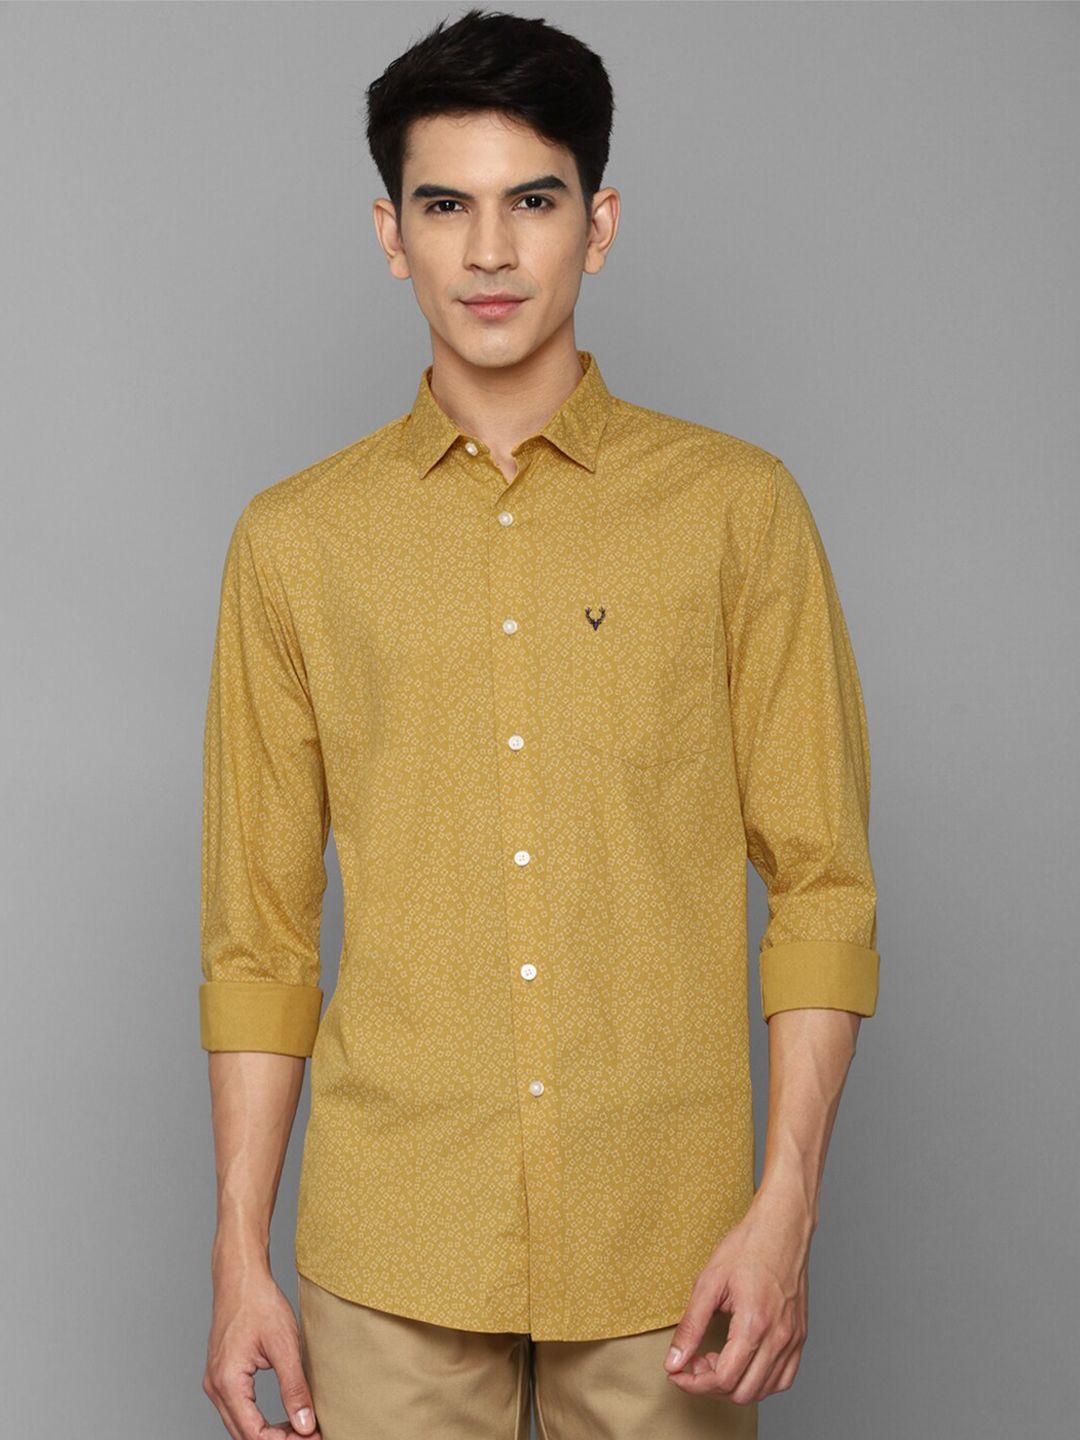 allen-solly-men-yellow-slim-fit-printed-cotton-casual-shirt